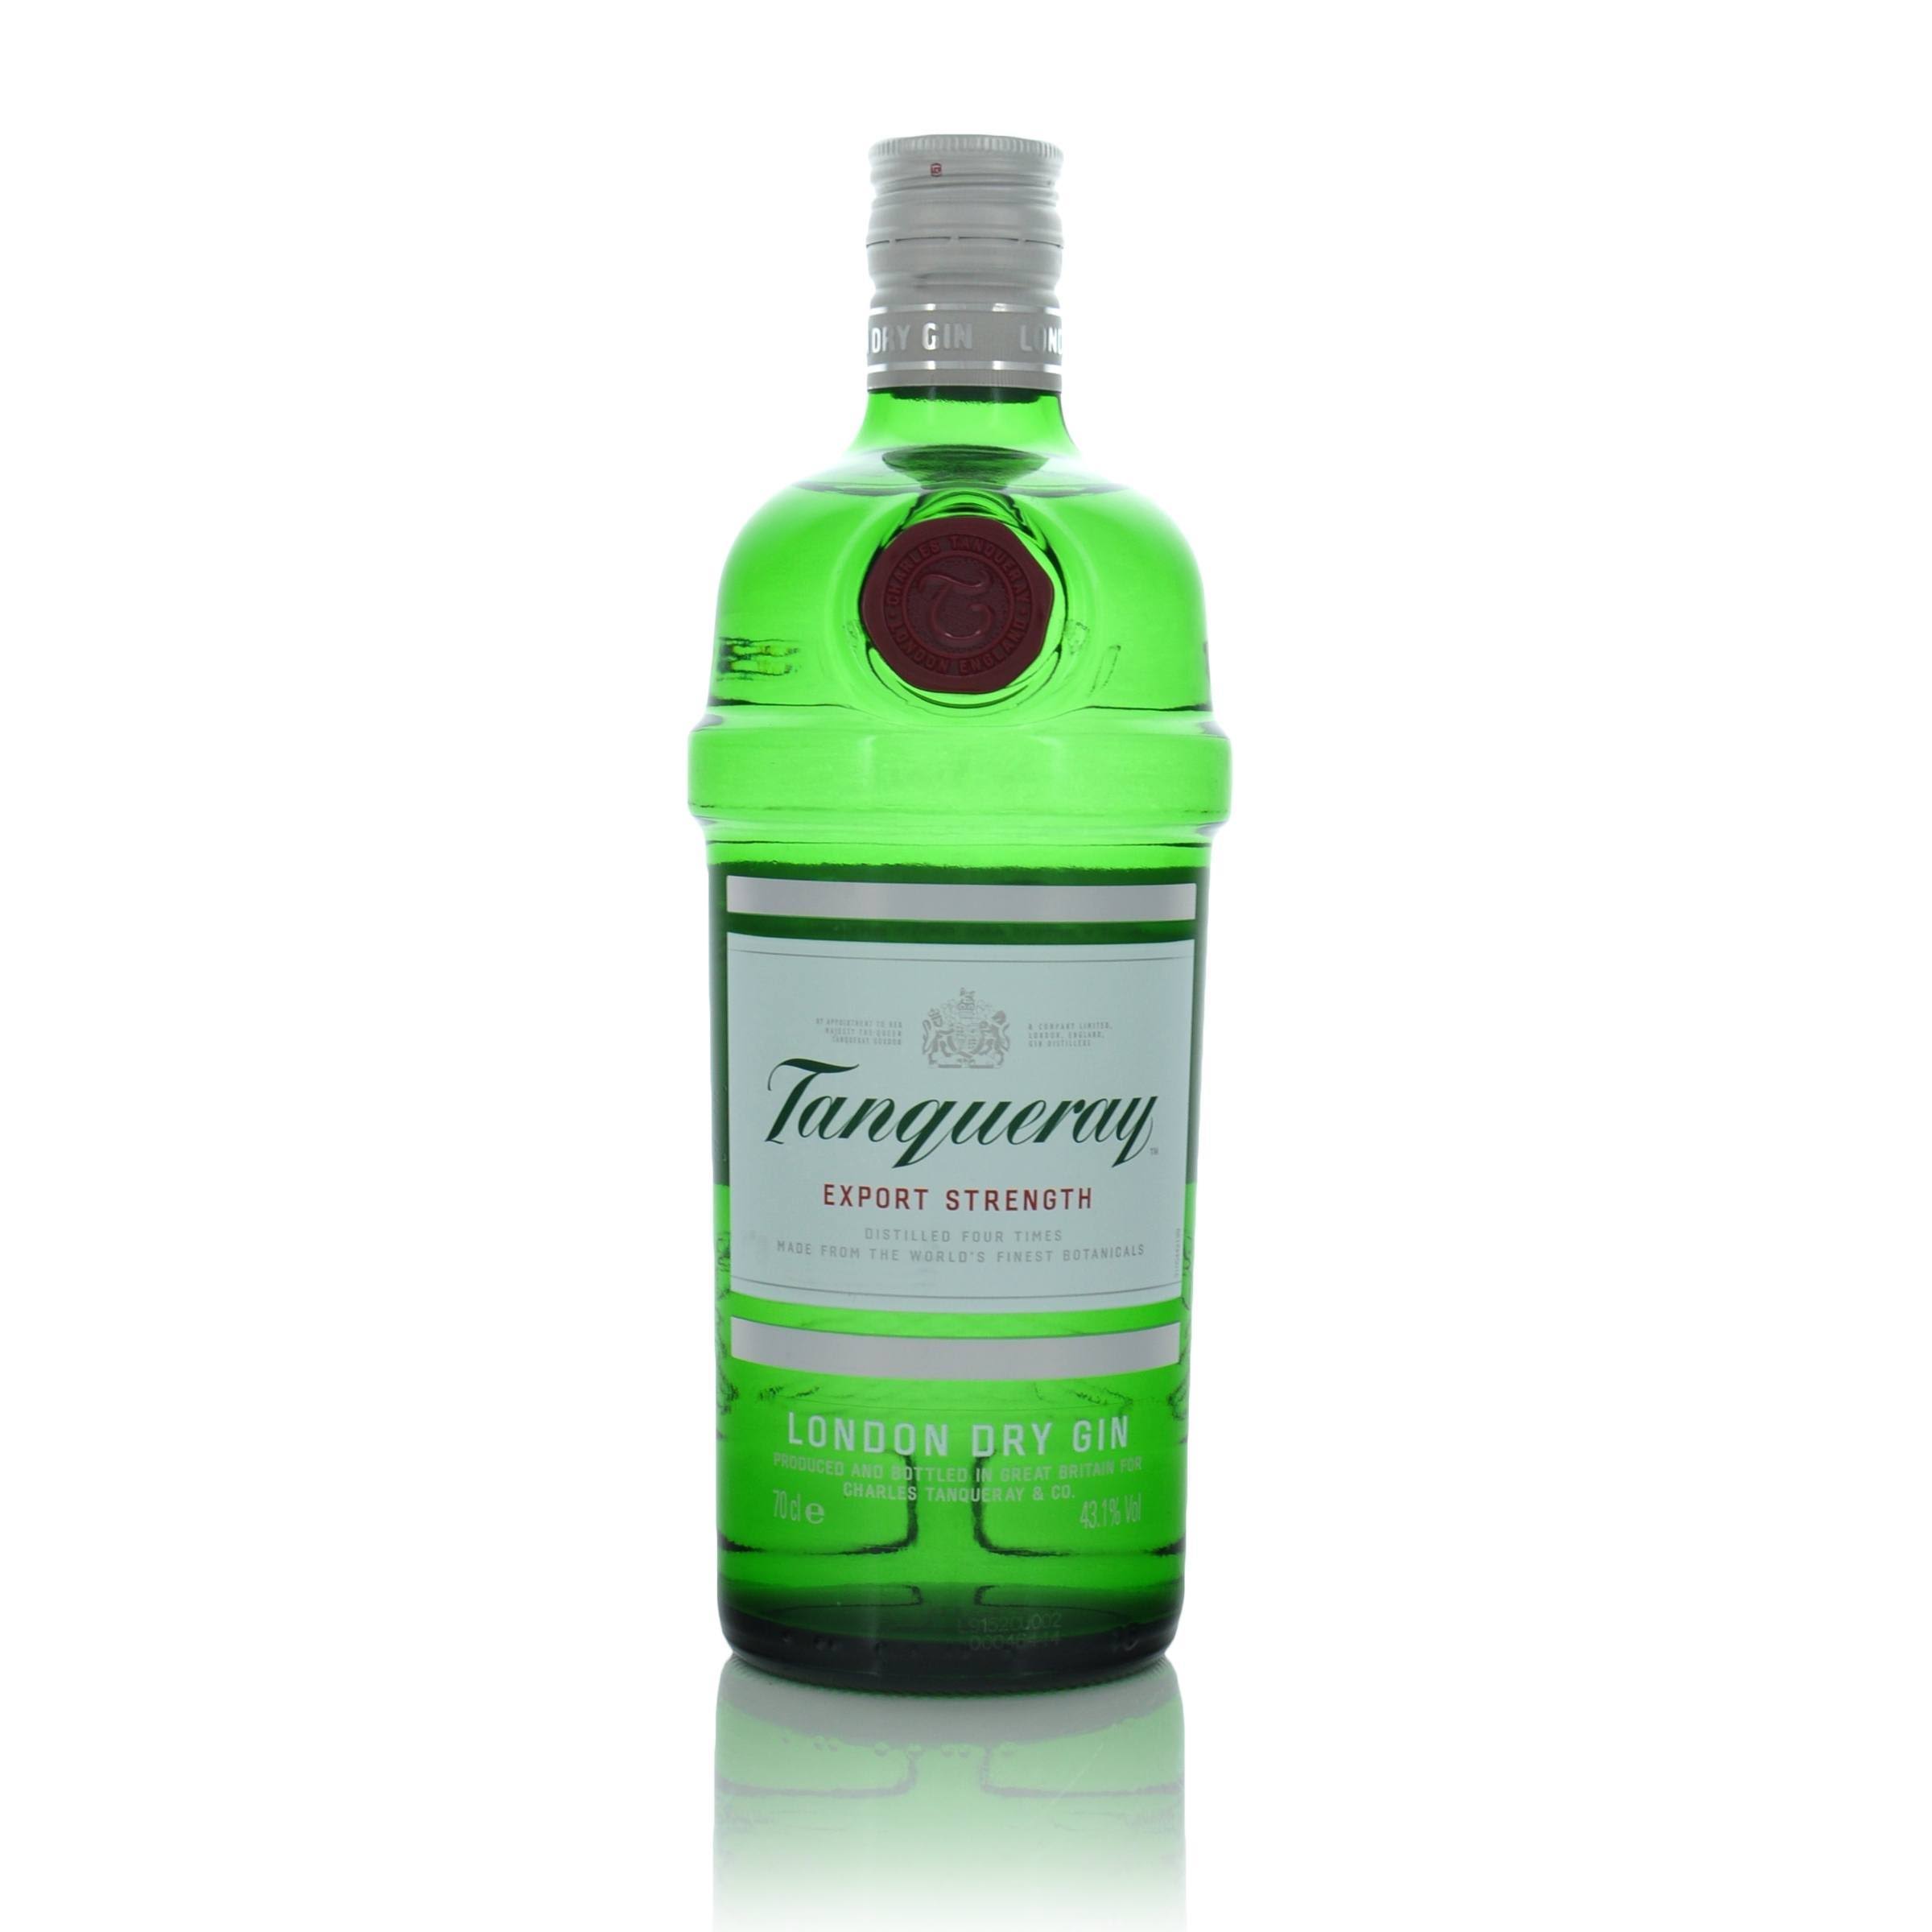 Tanqueray London Dry Gin - 700ml